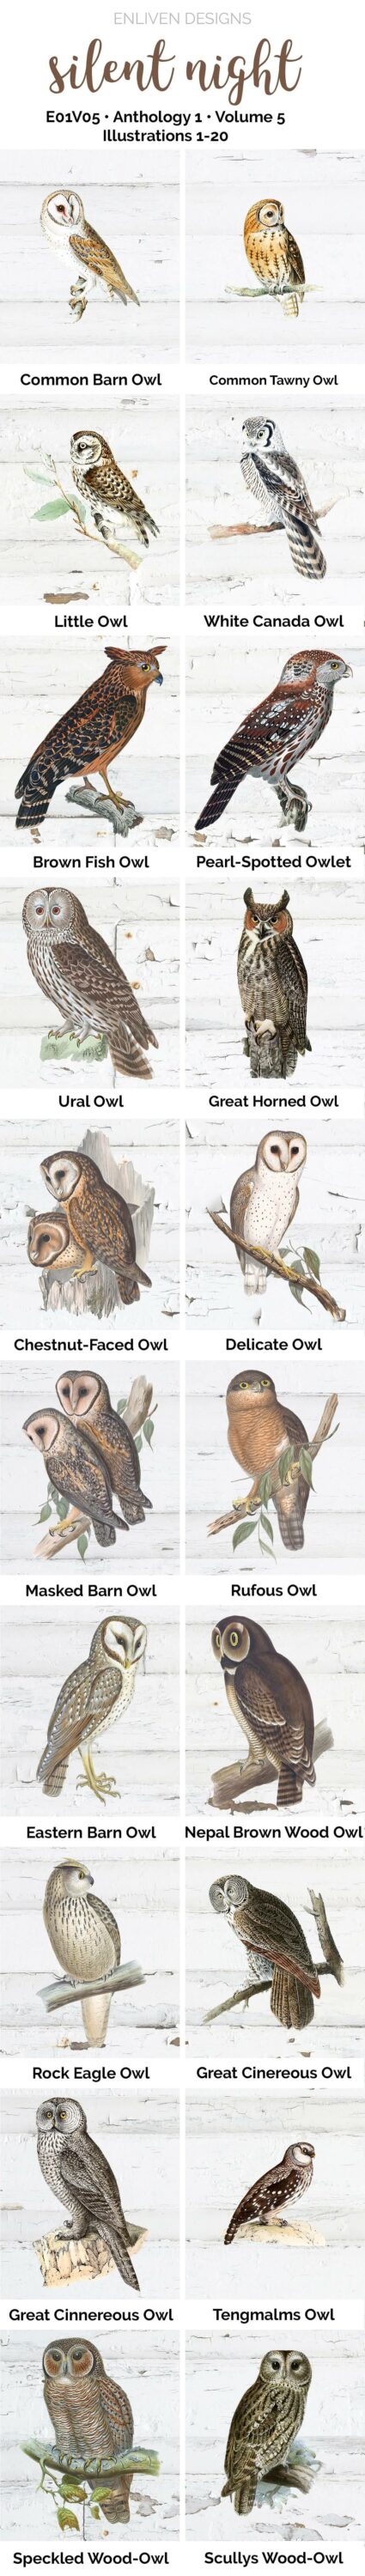 Large canvas with drawings and names of different owls.